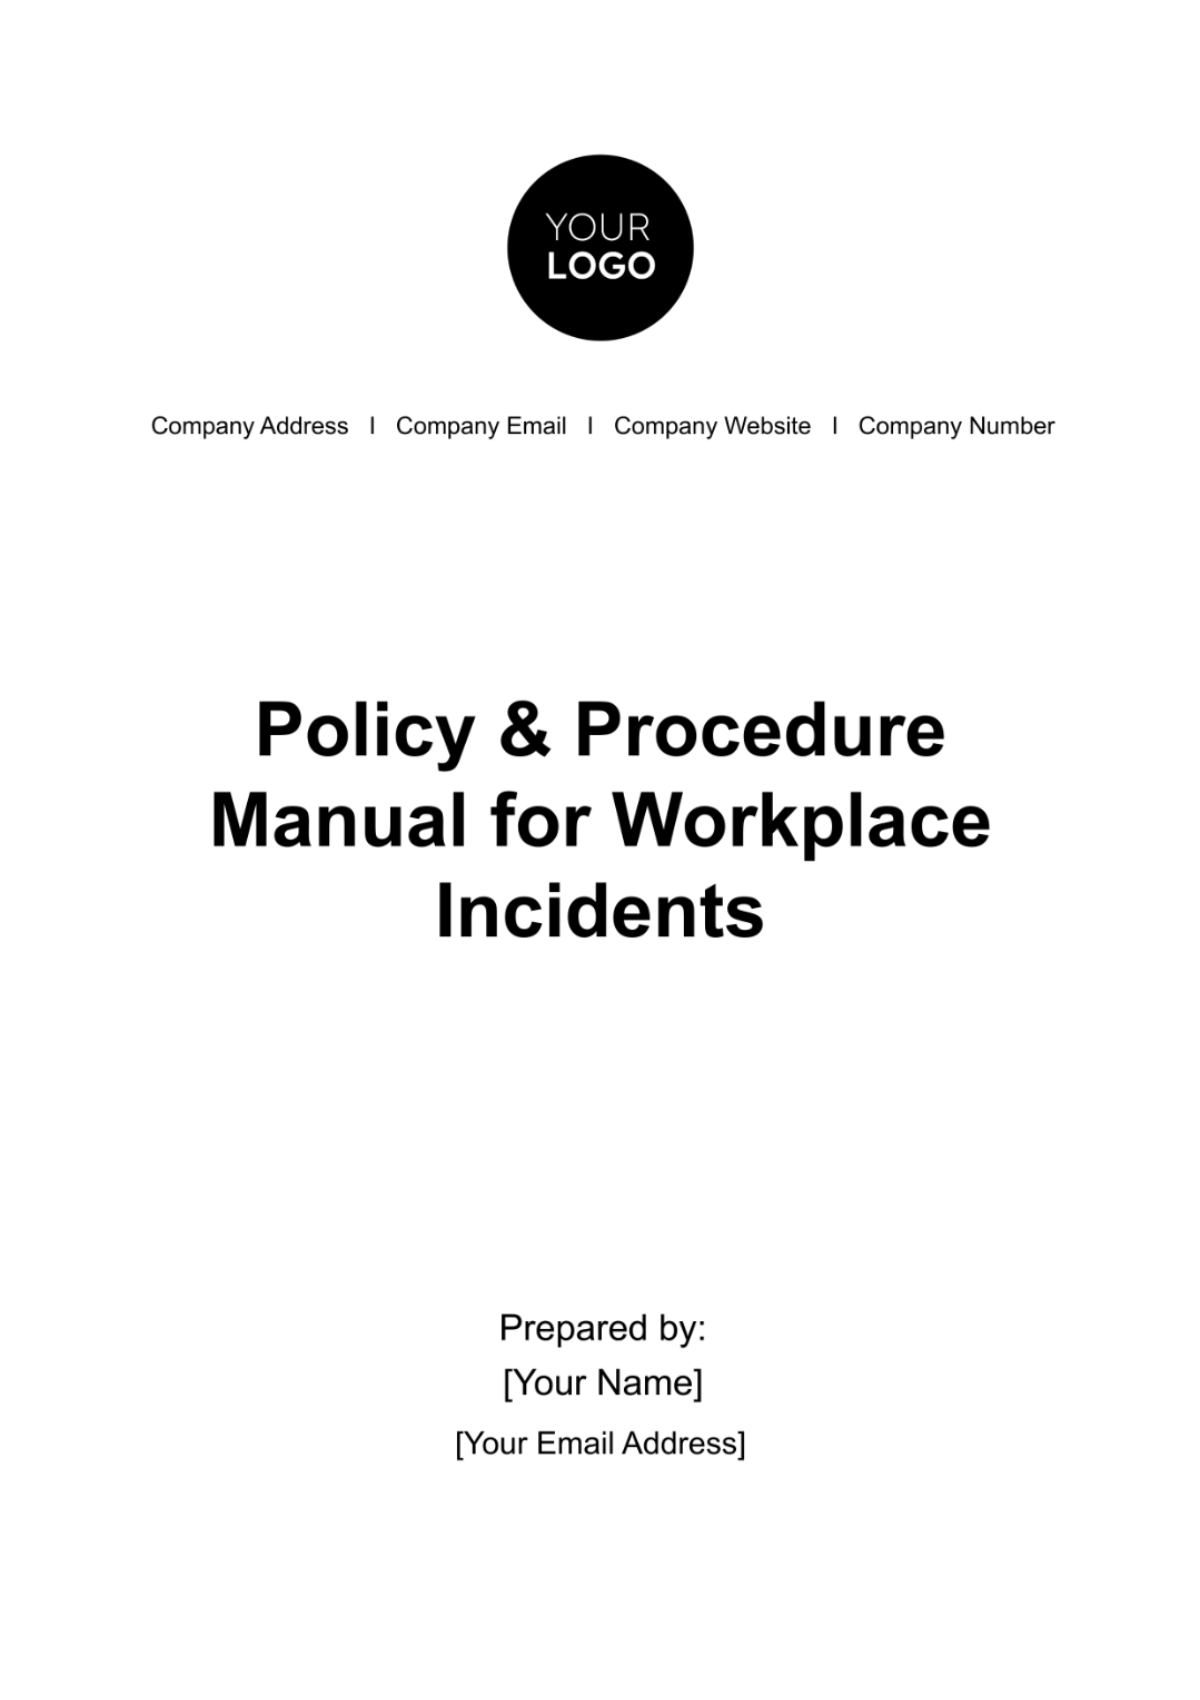 Policy & Procedure Manual for Workplace Incidents HR Template